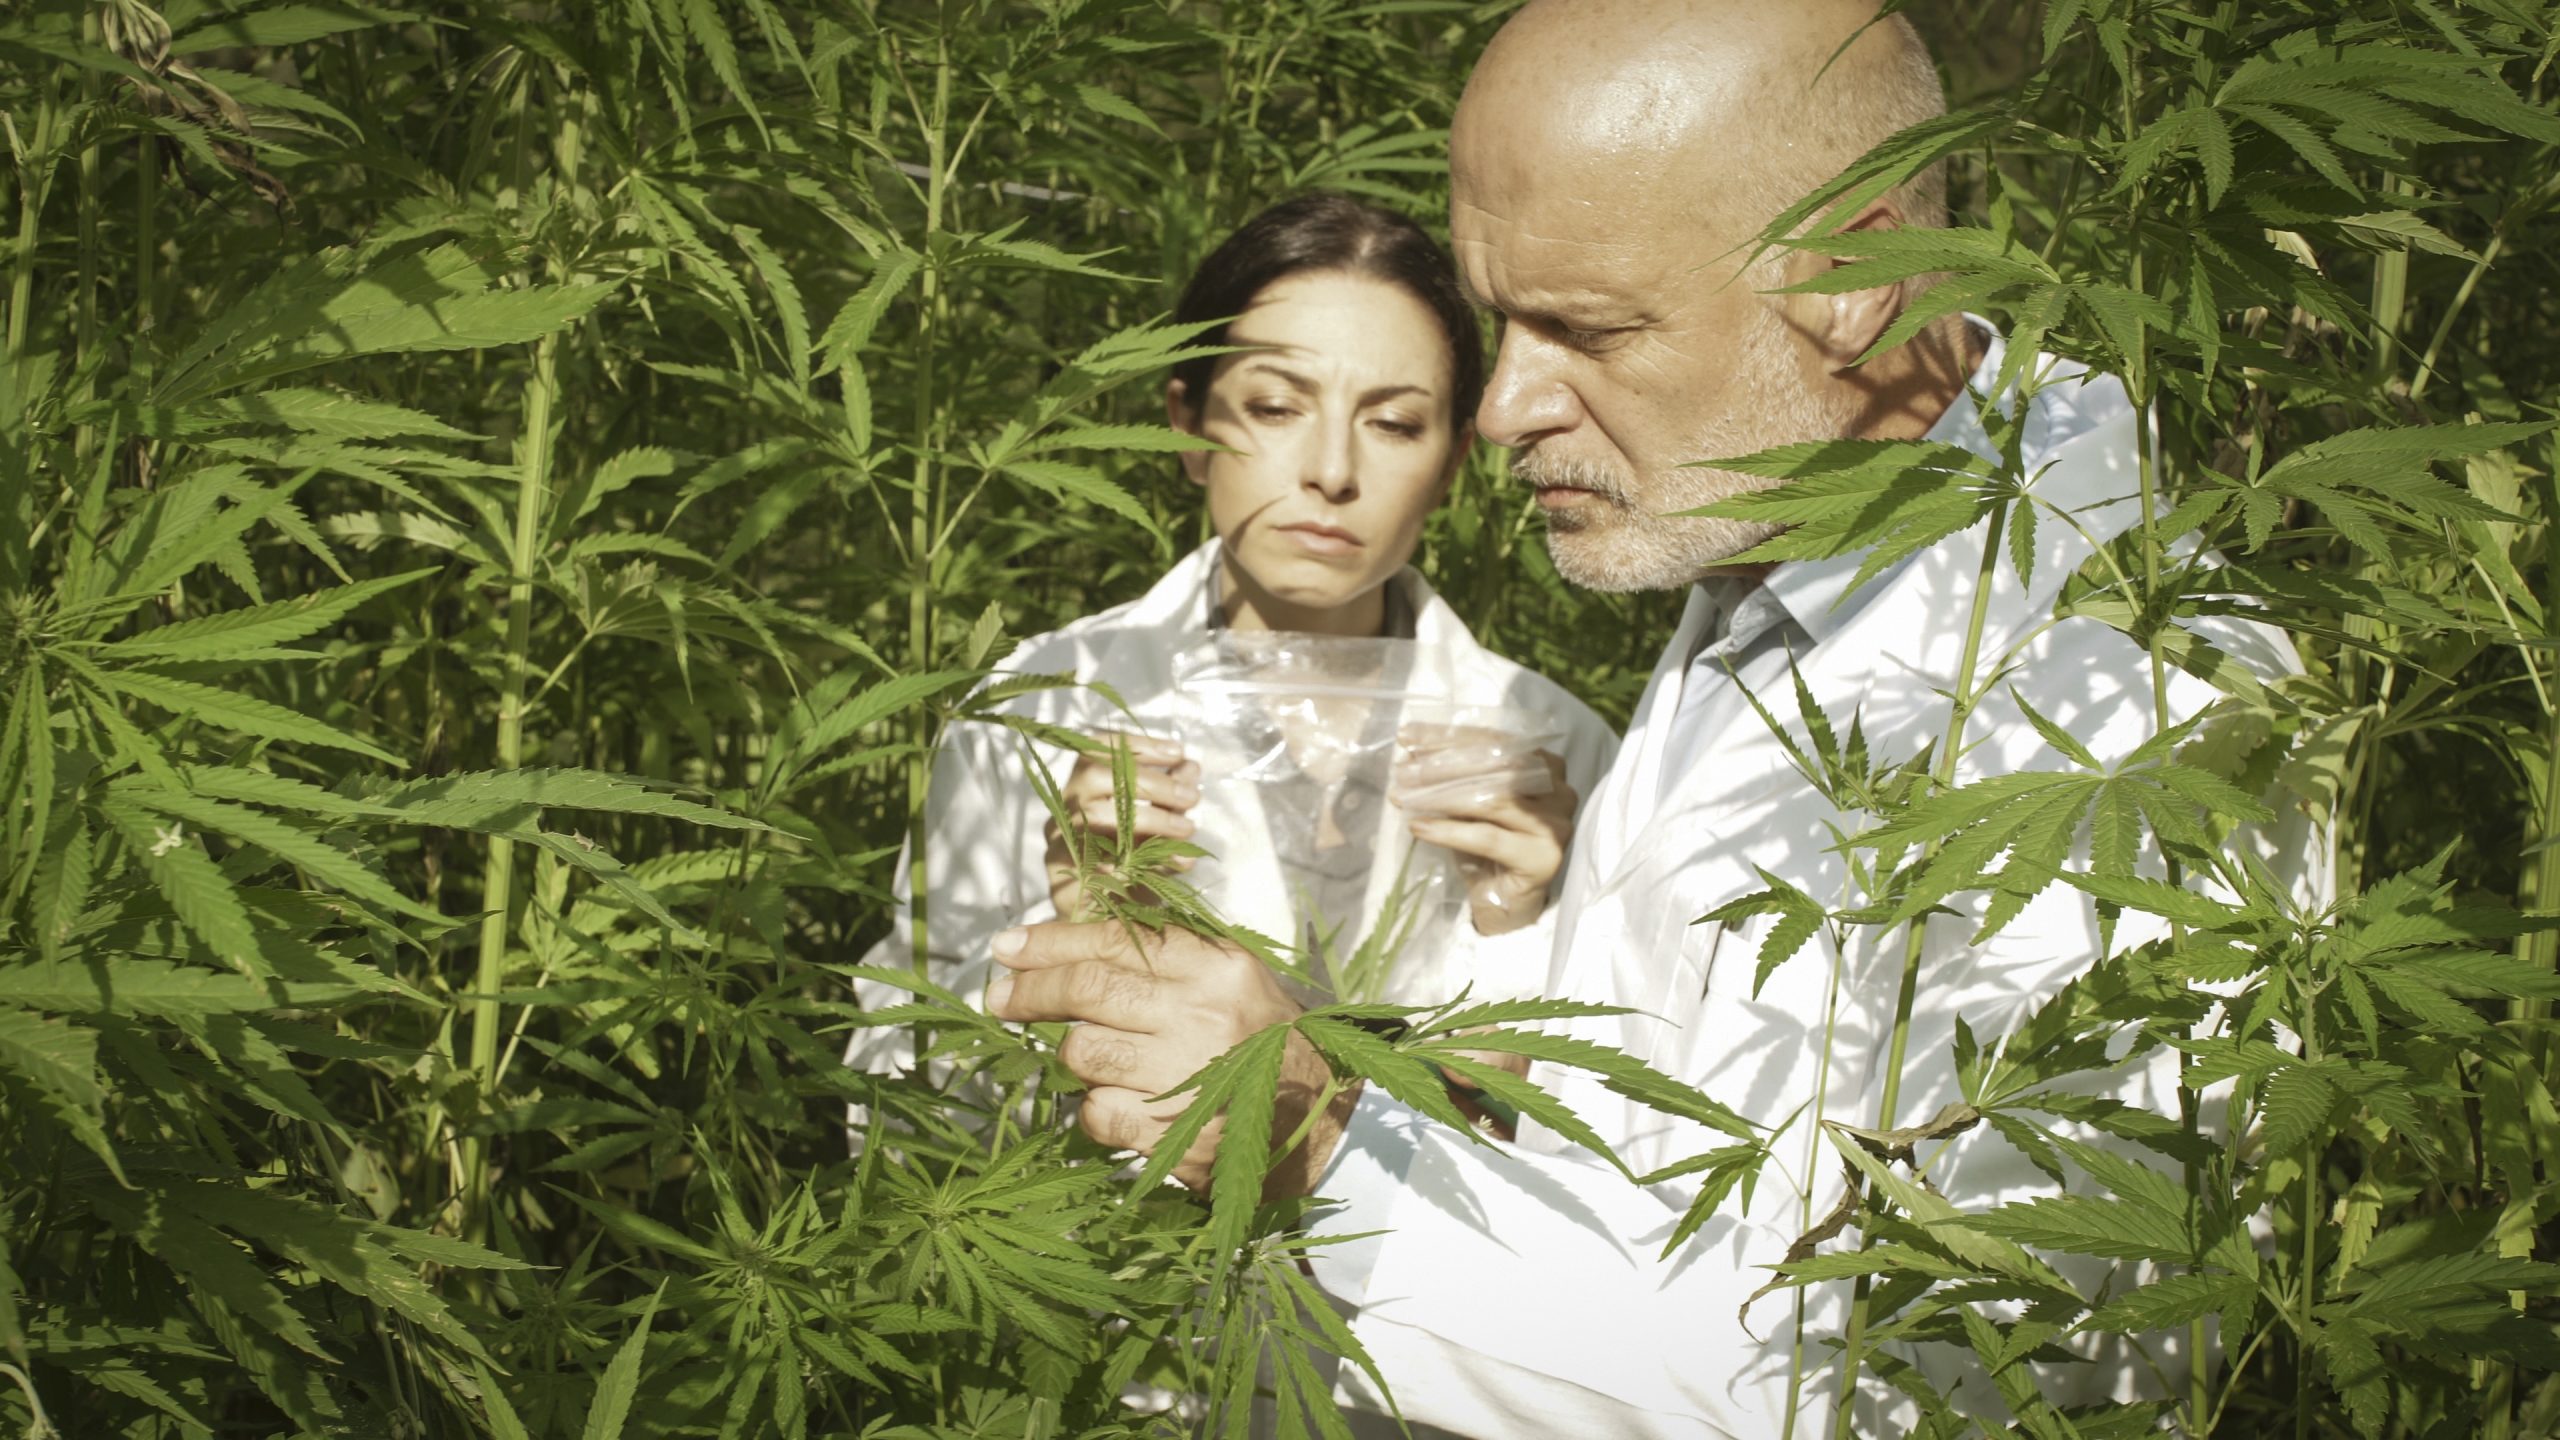 Researchers collecting hemp plant samples in the field